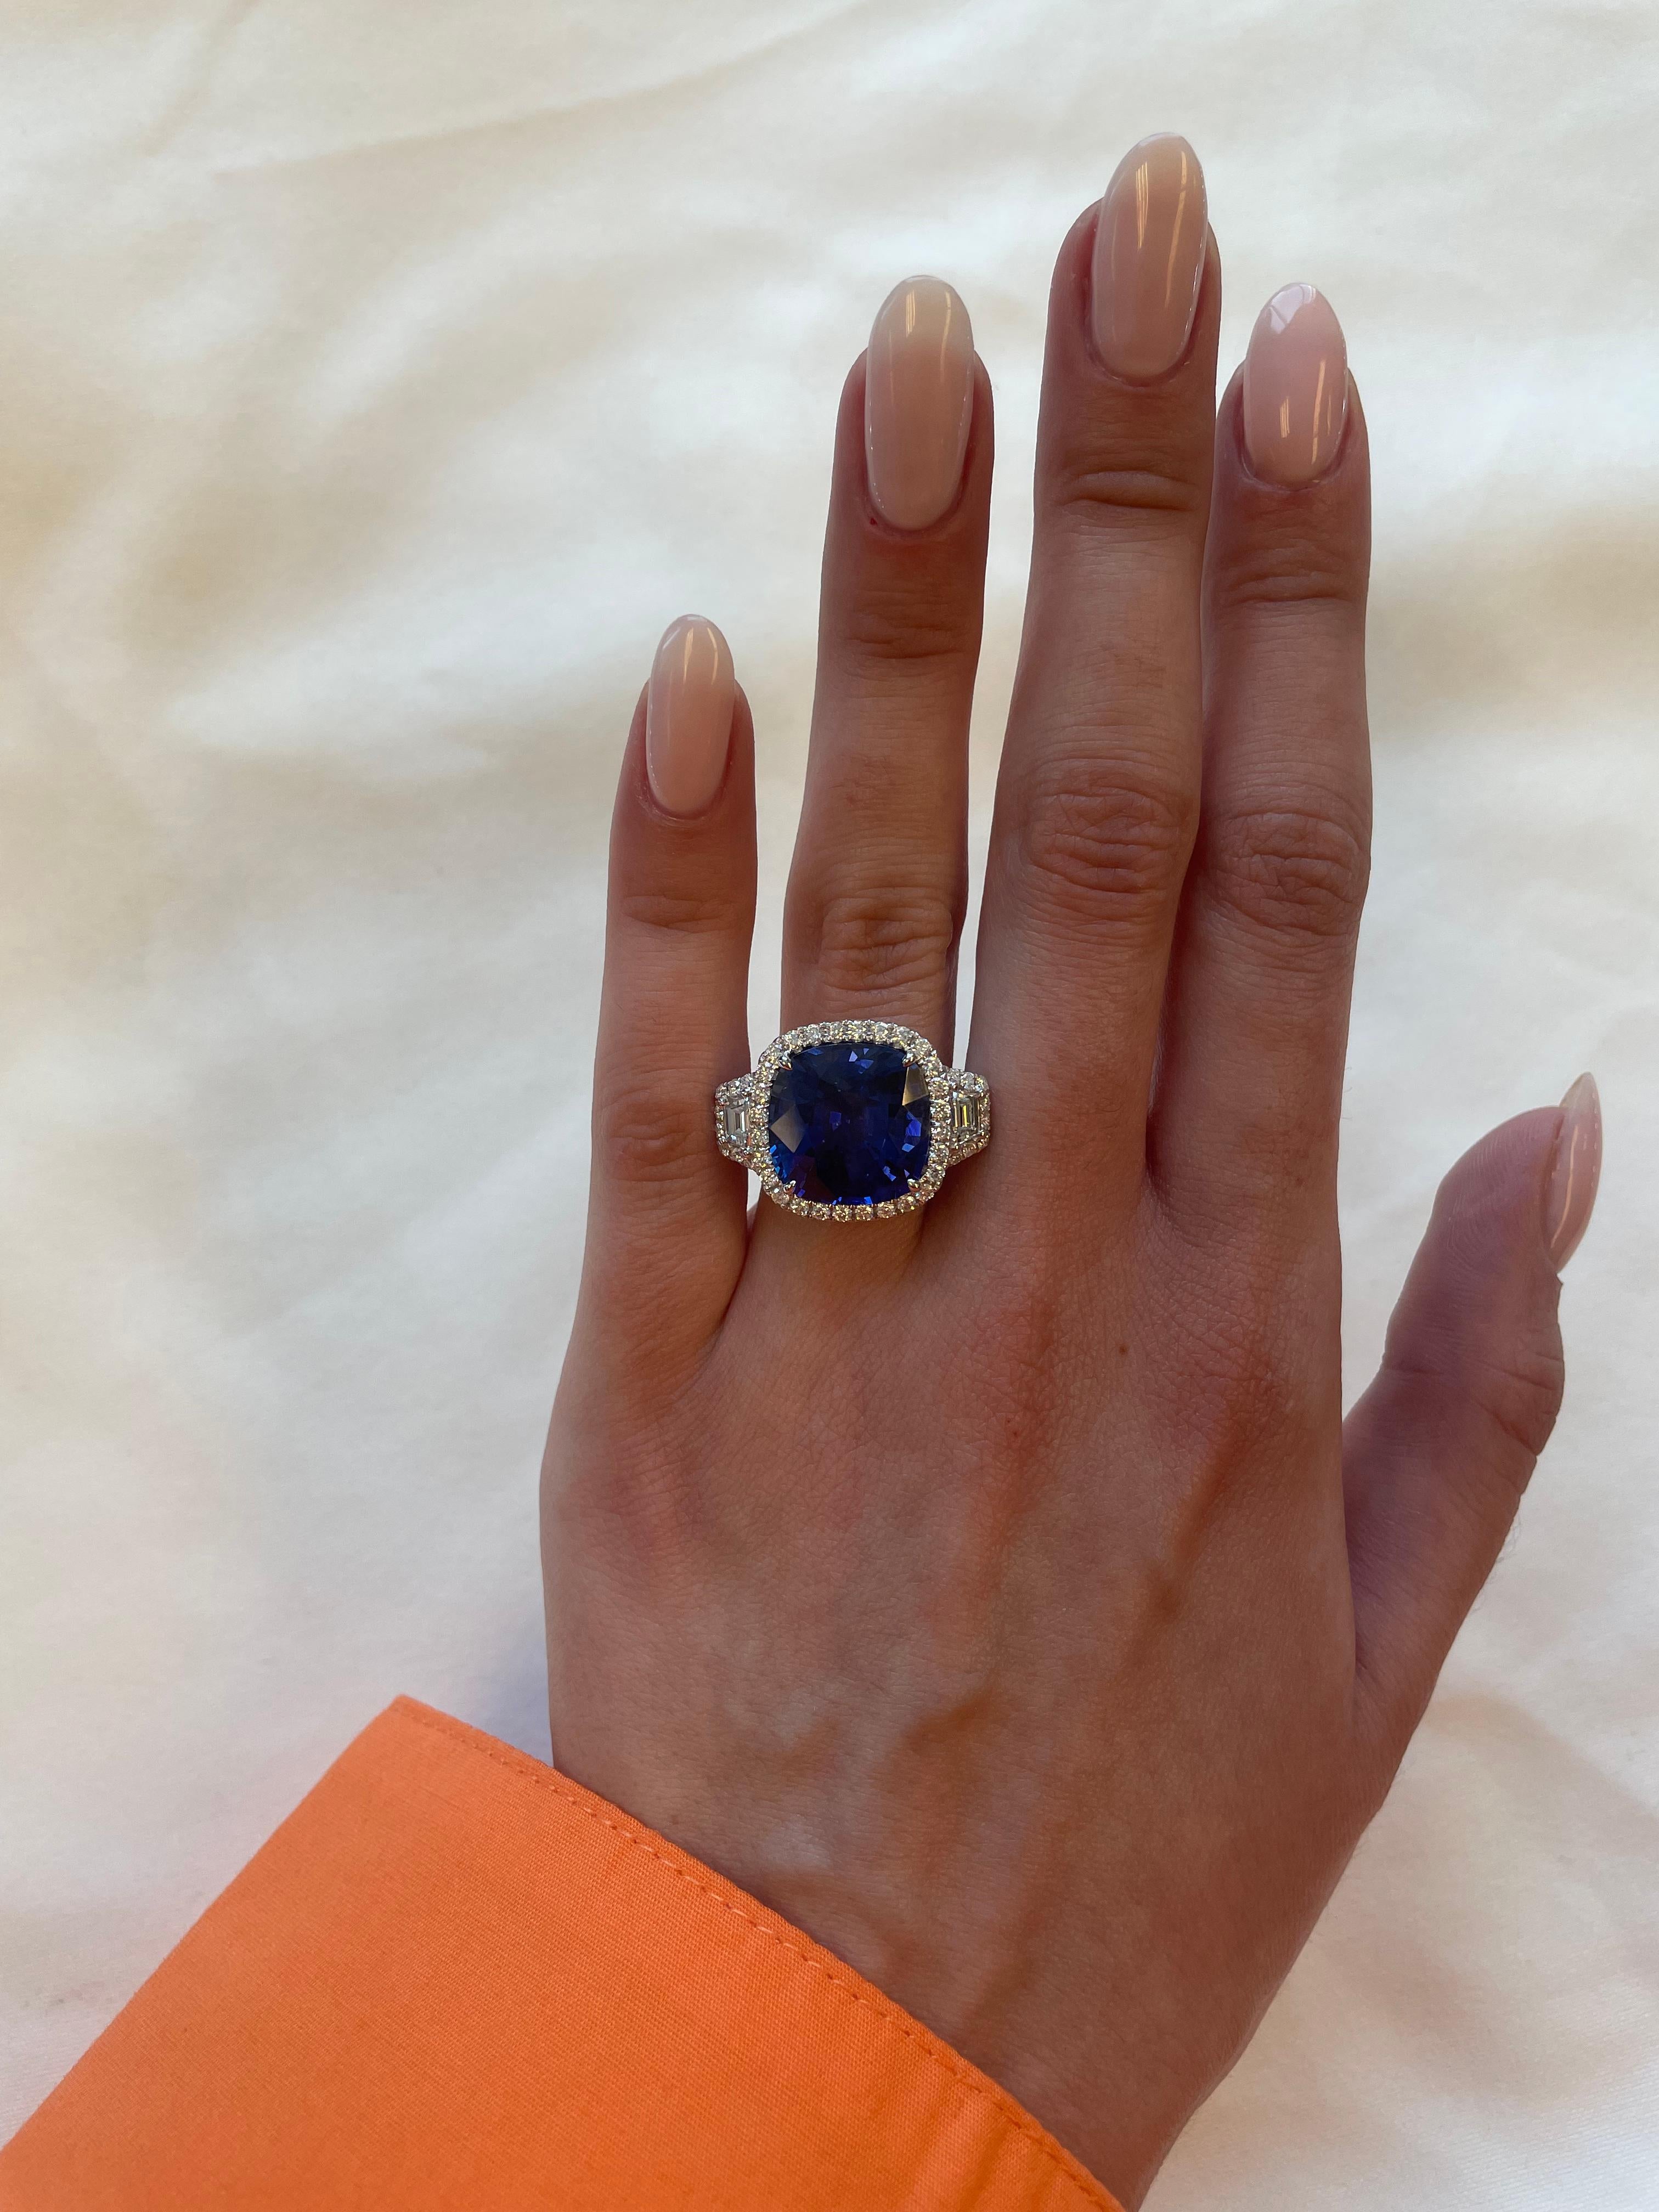 Stunning Ceylon sapphire of superb color and diamond halo ring, GIA certified. High jewelry by Alexander Beverly Hills. 
13.60 carats total gemstone weight.
GIA certified 12.08 carat cushion sapphire (faces up like a 18ct), Sri Lanka (Ceylon)